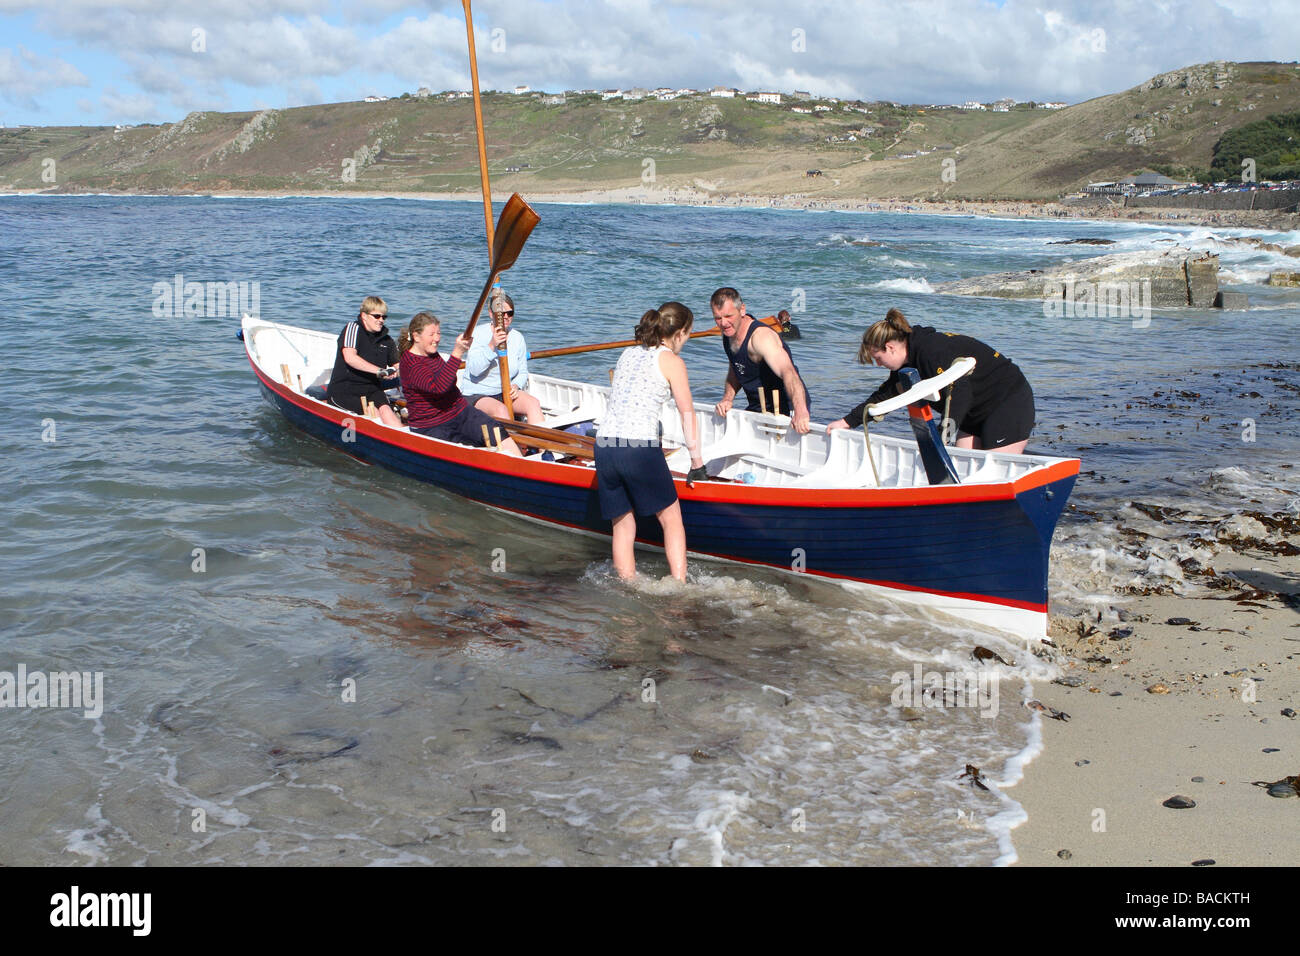 Sennen Cornwall the crew of the Cape Cornwall Pilot Gig boat prepare to launch from the sandy beach at Sennen Cove UK Stock Photo